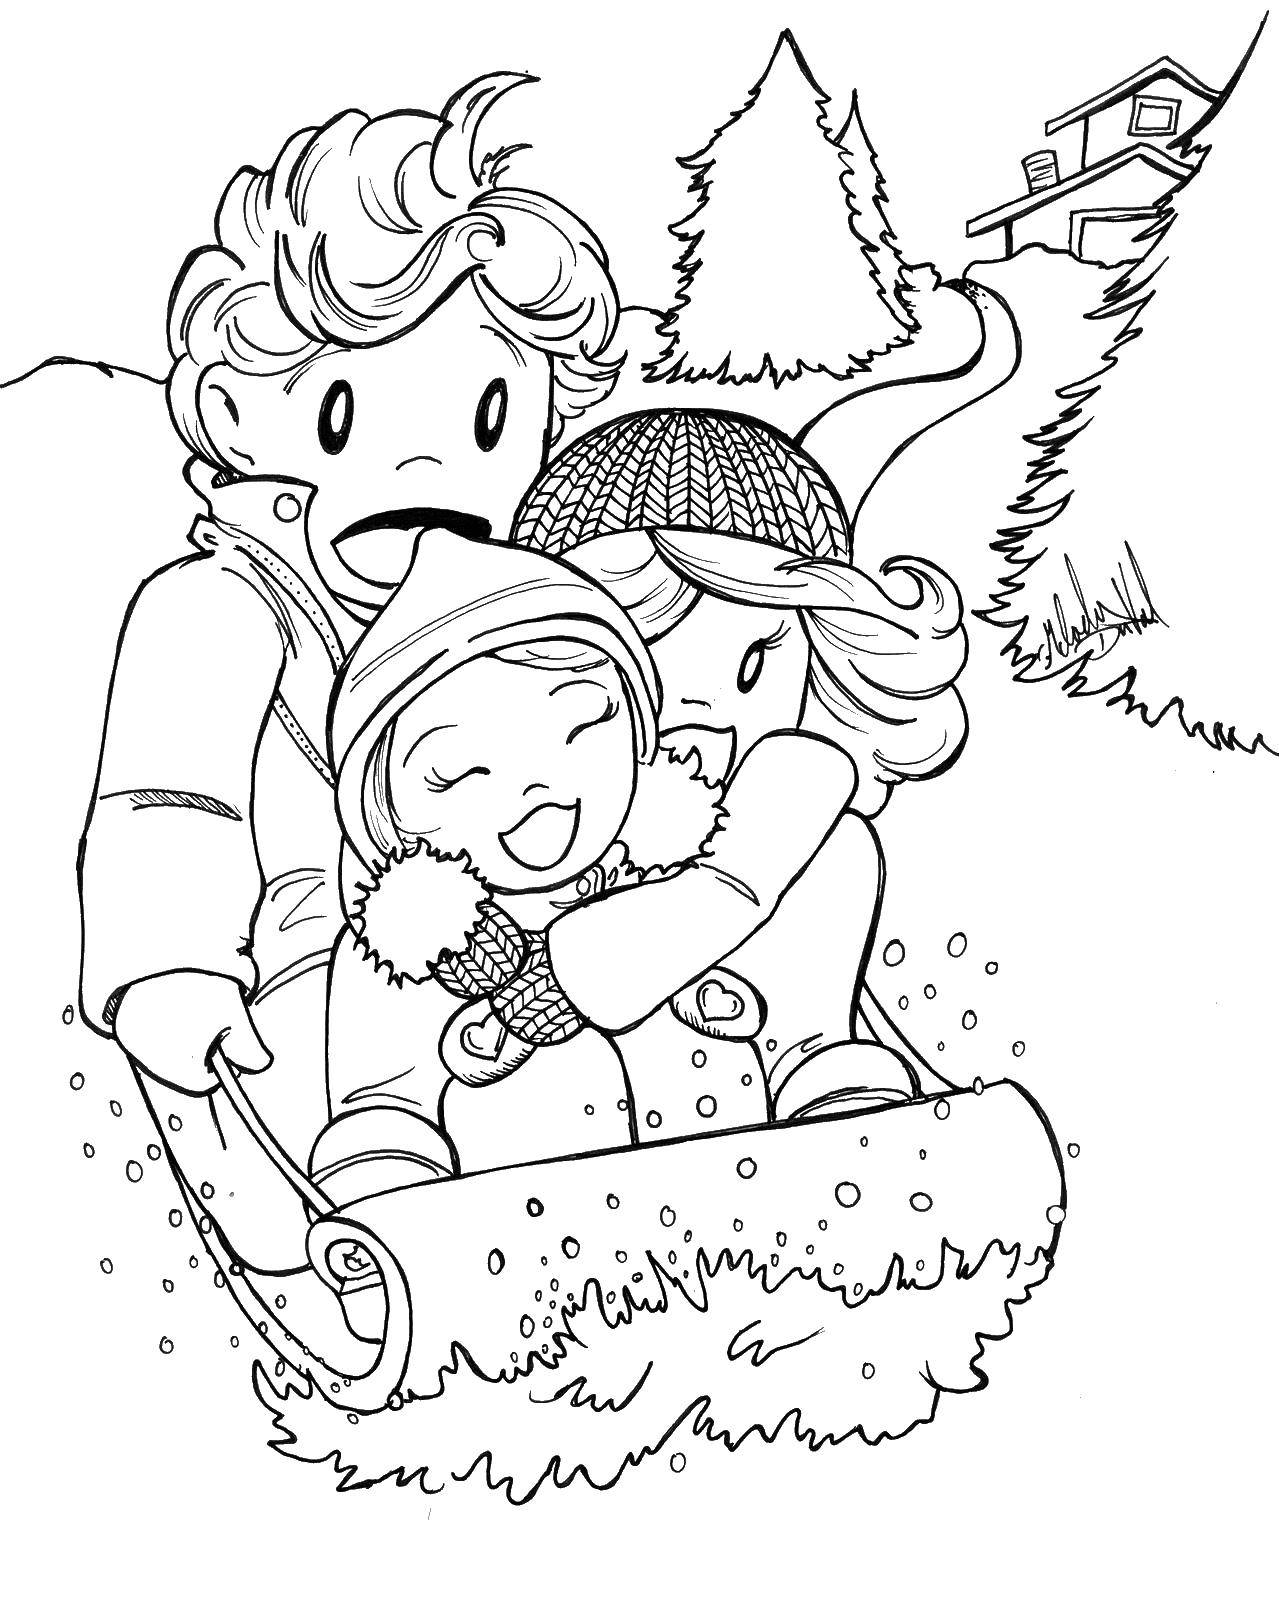 Coloring Family sledding. Category winter activities. Tags:  mom, dad, girl, sled.